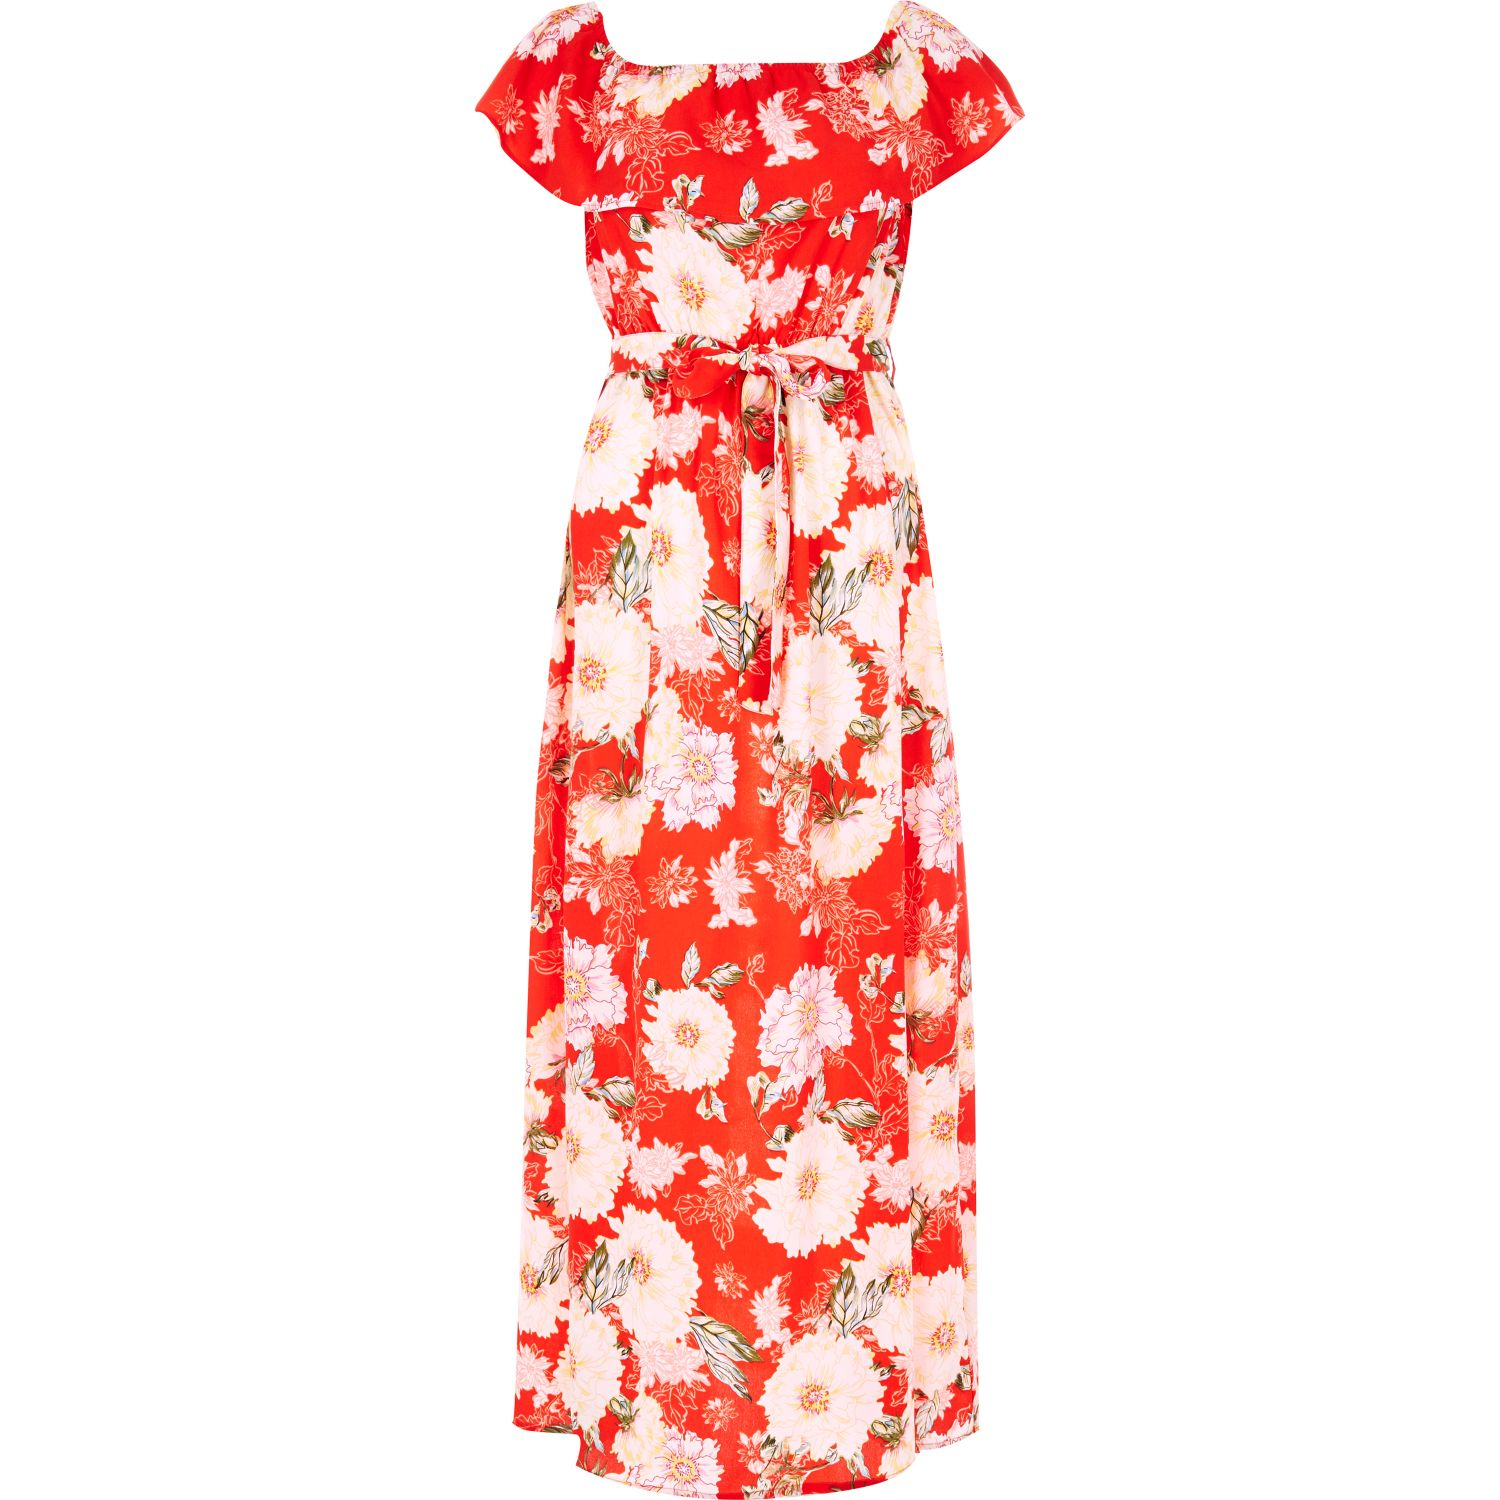 Lyst - River Island Red Floral Print Bardot Maxi Dress in Red